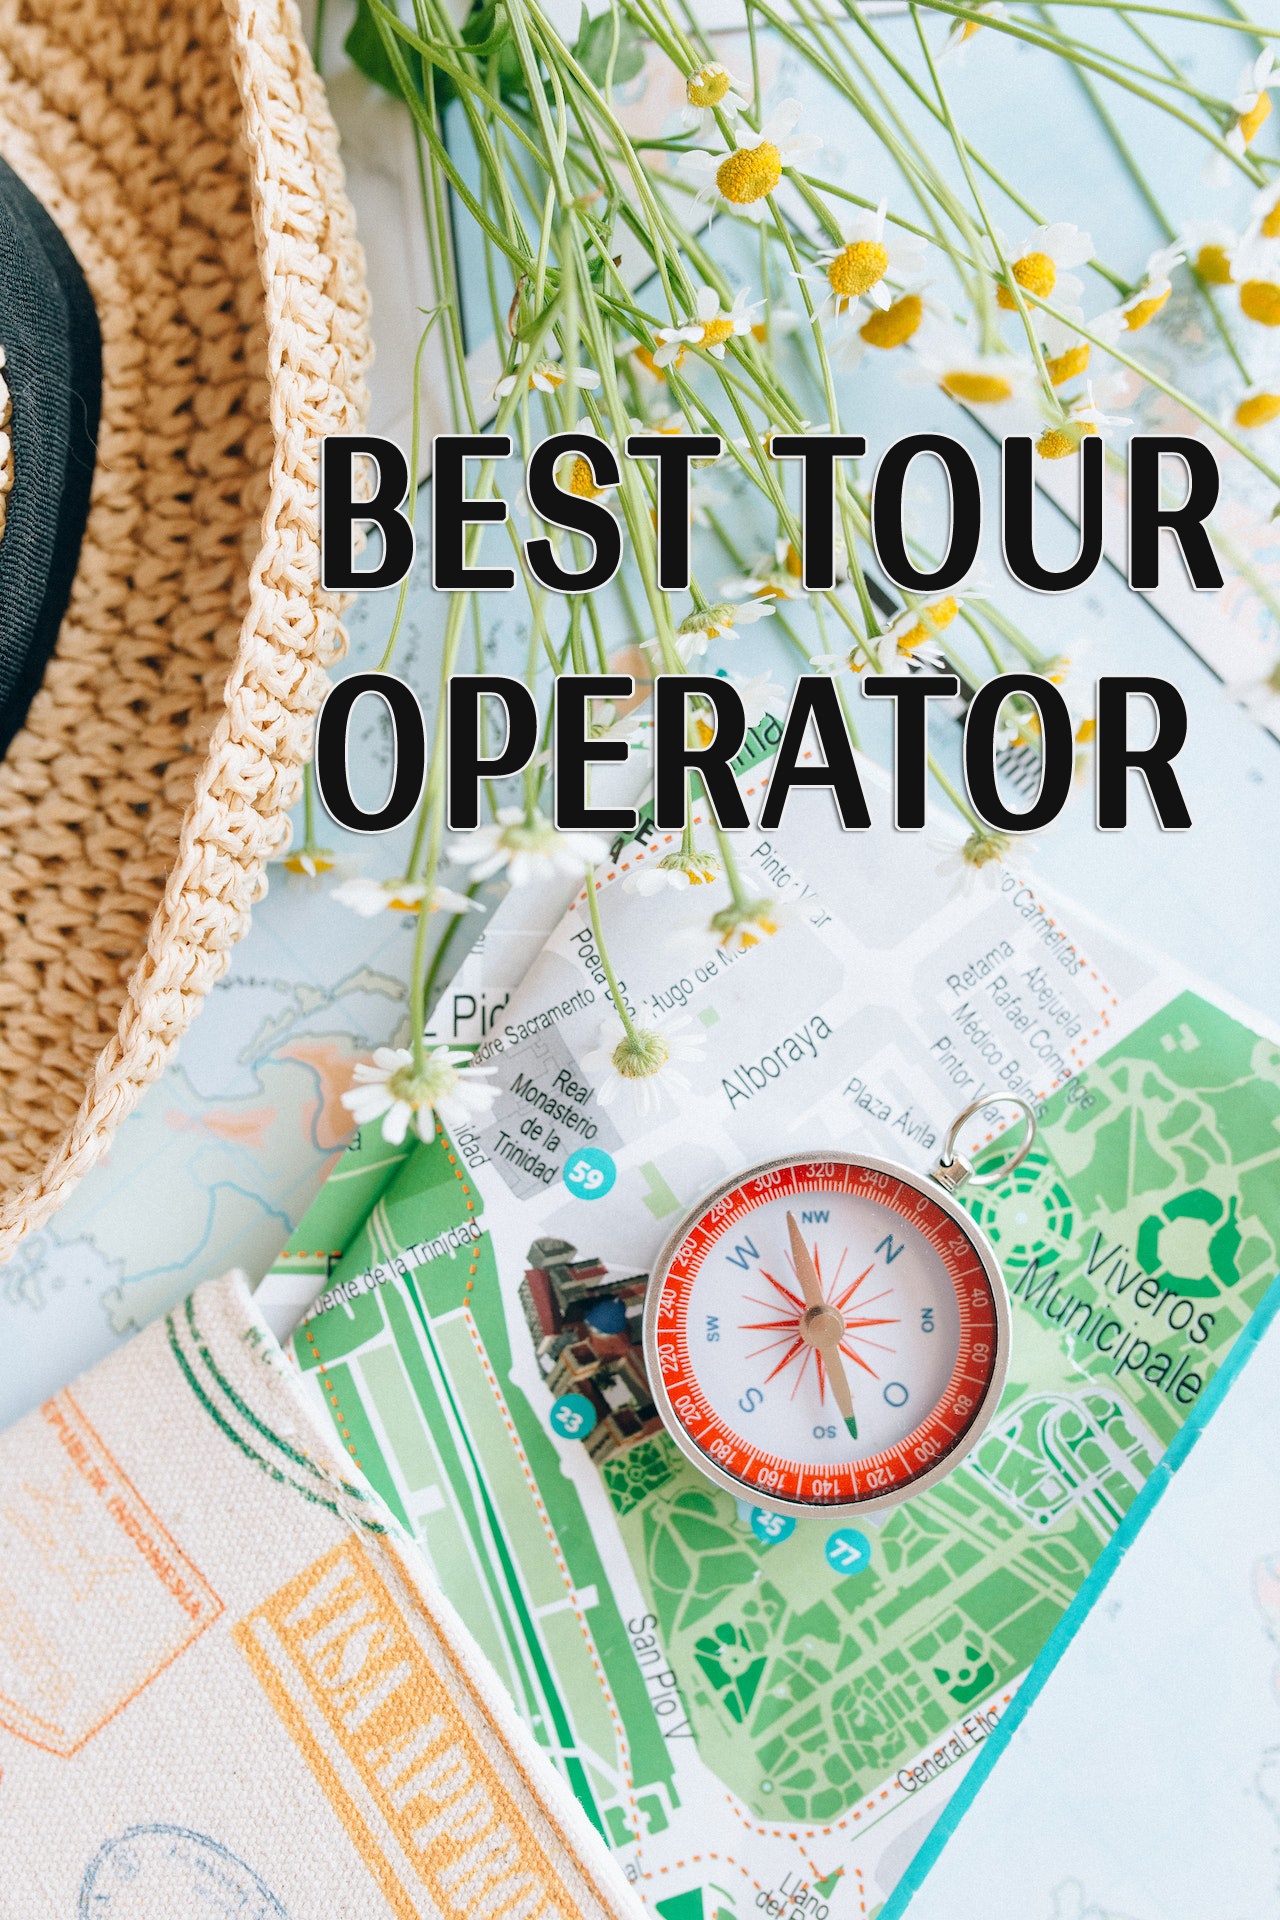 How to choose best tour operator for your vacation